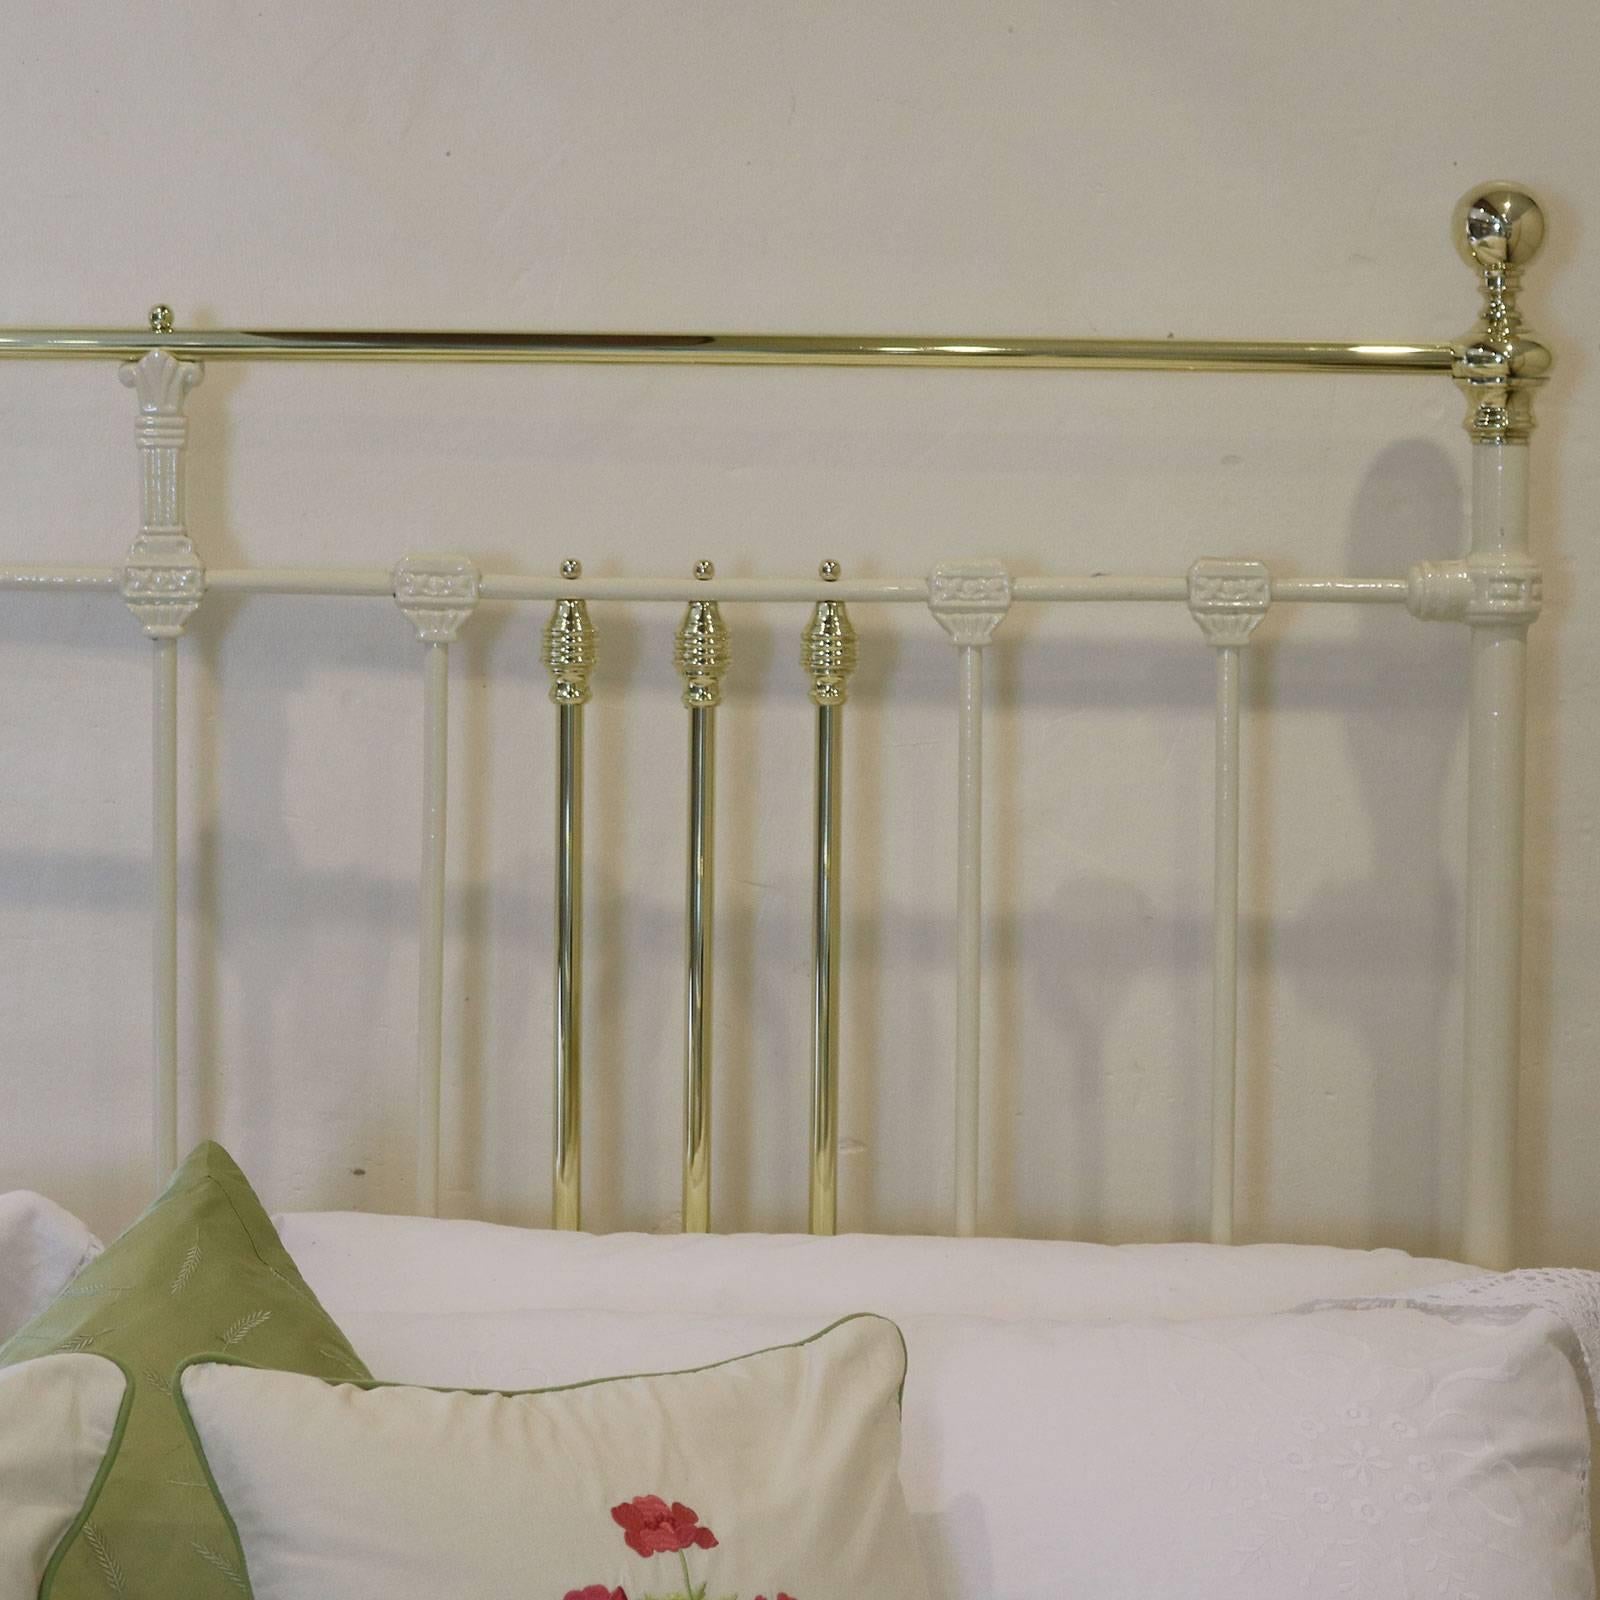 Wide Brass and Iron Bed in Cream, MK81 2